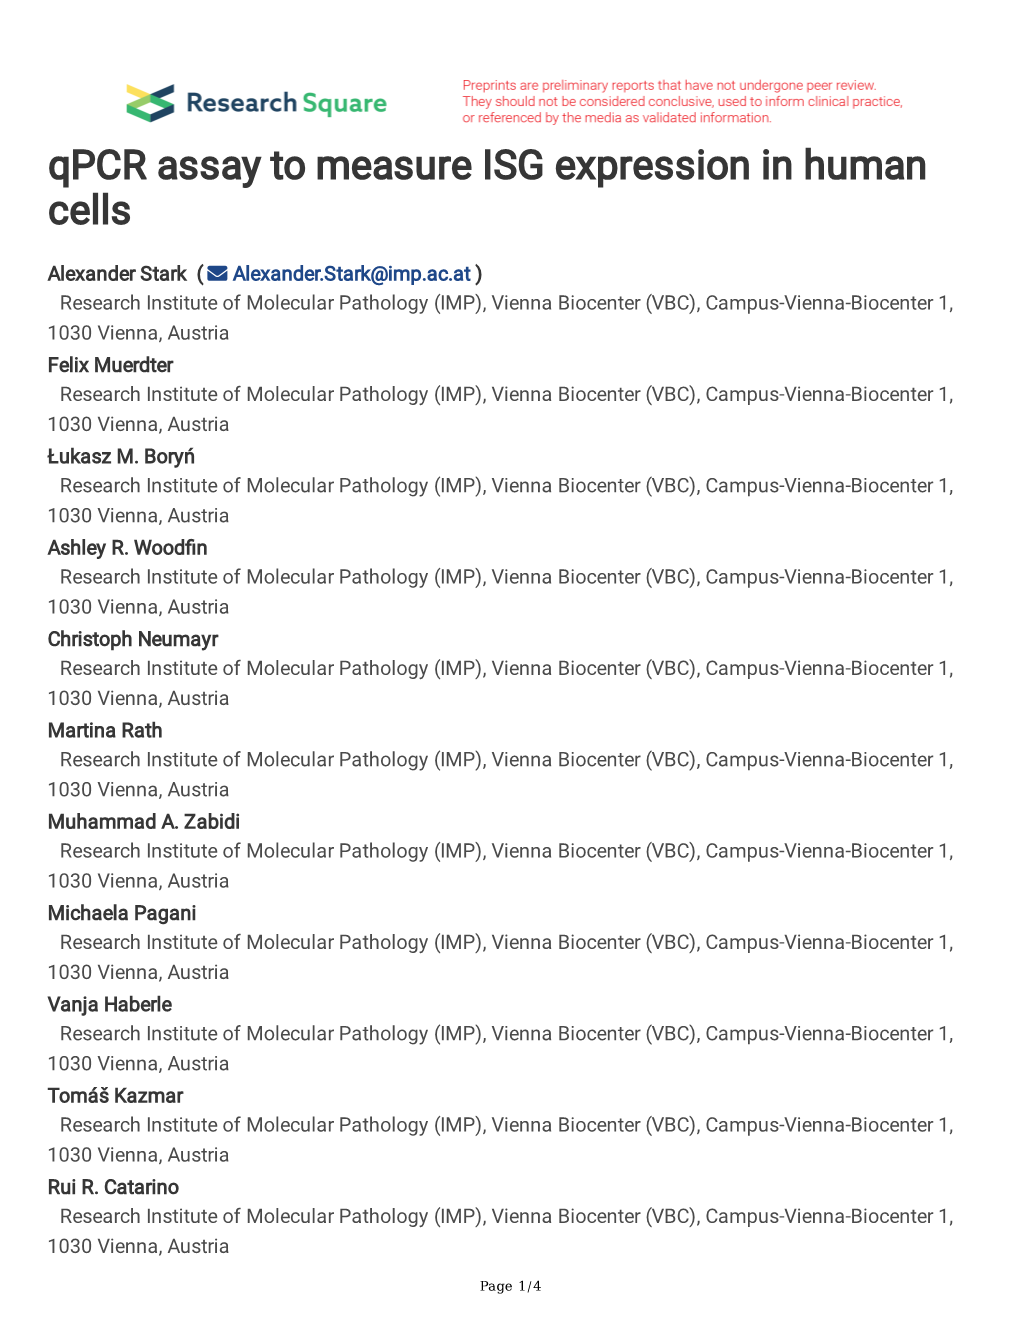 Qpcr Assay to Measure ISG Expression in Human Cells